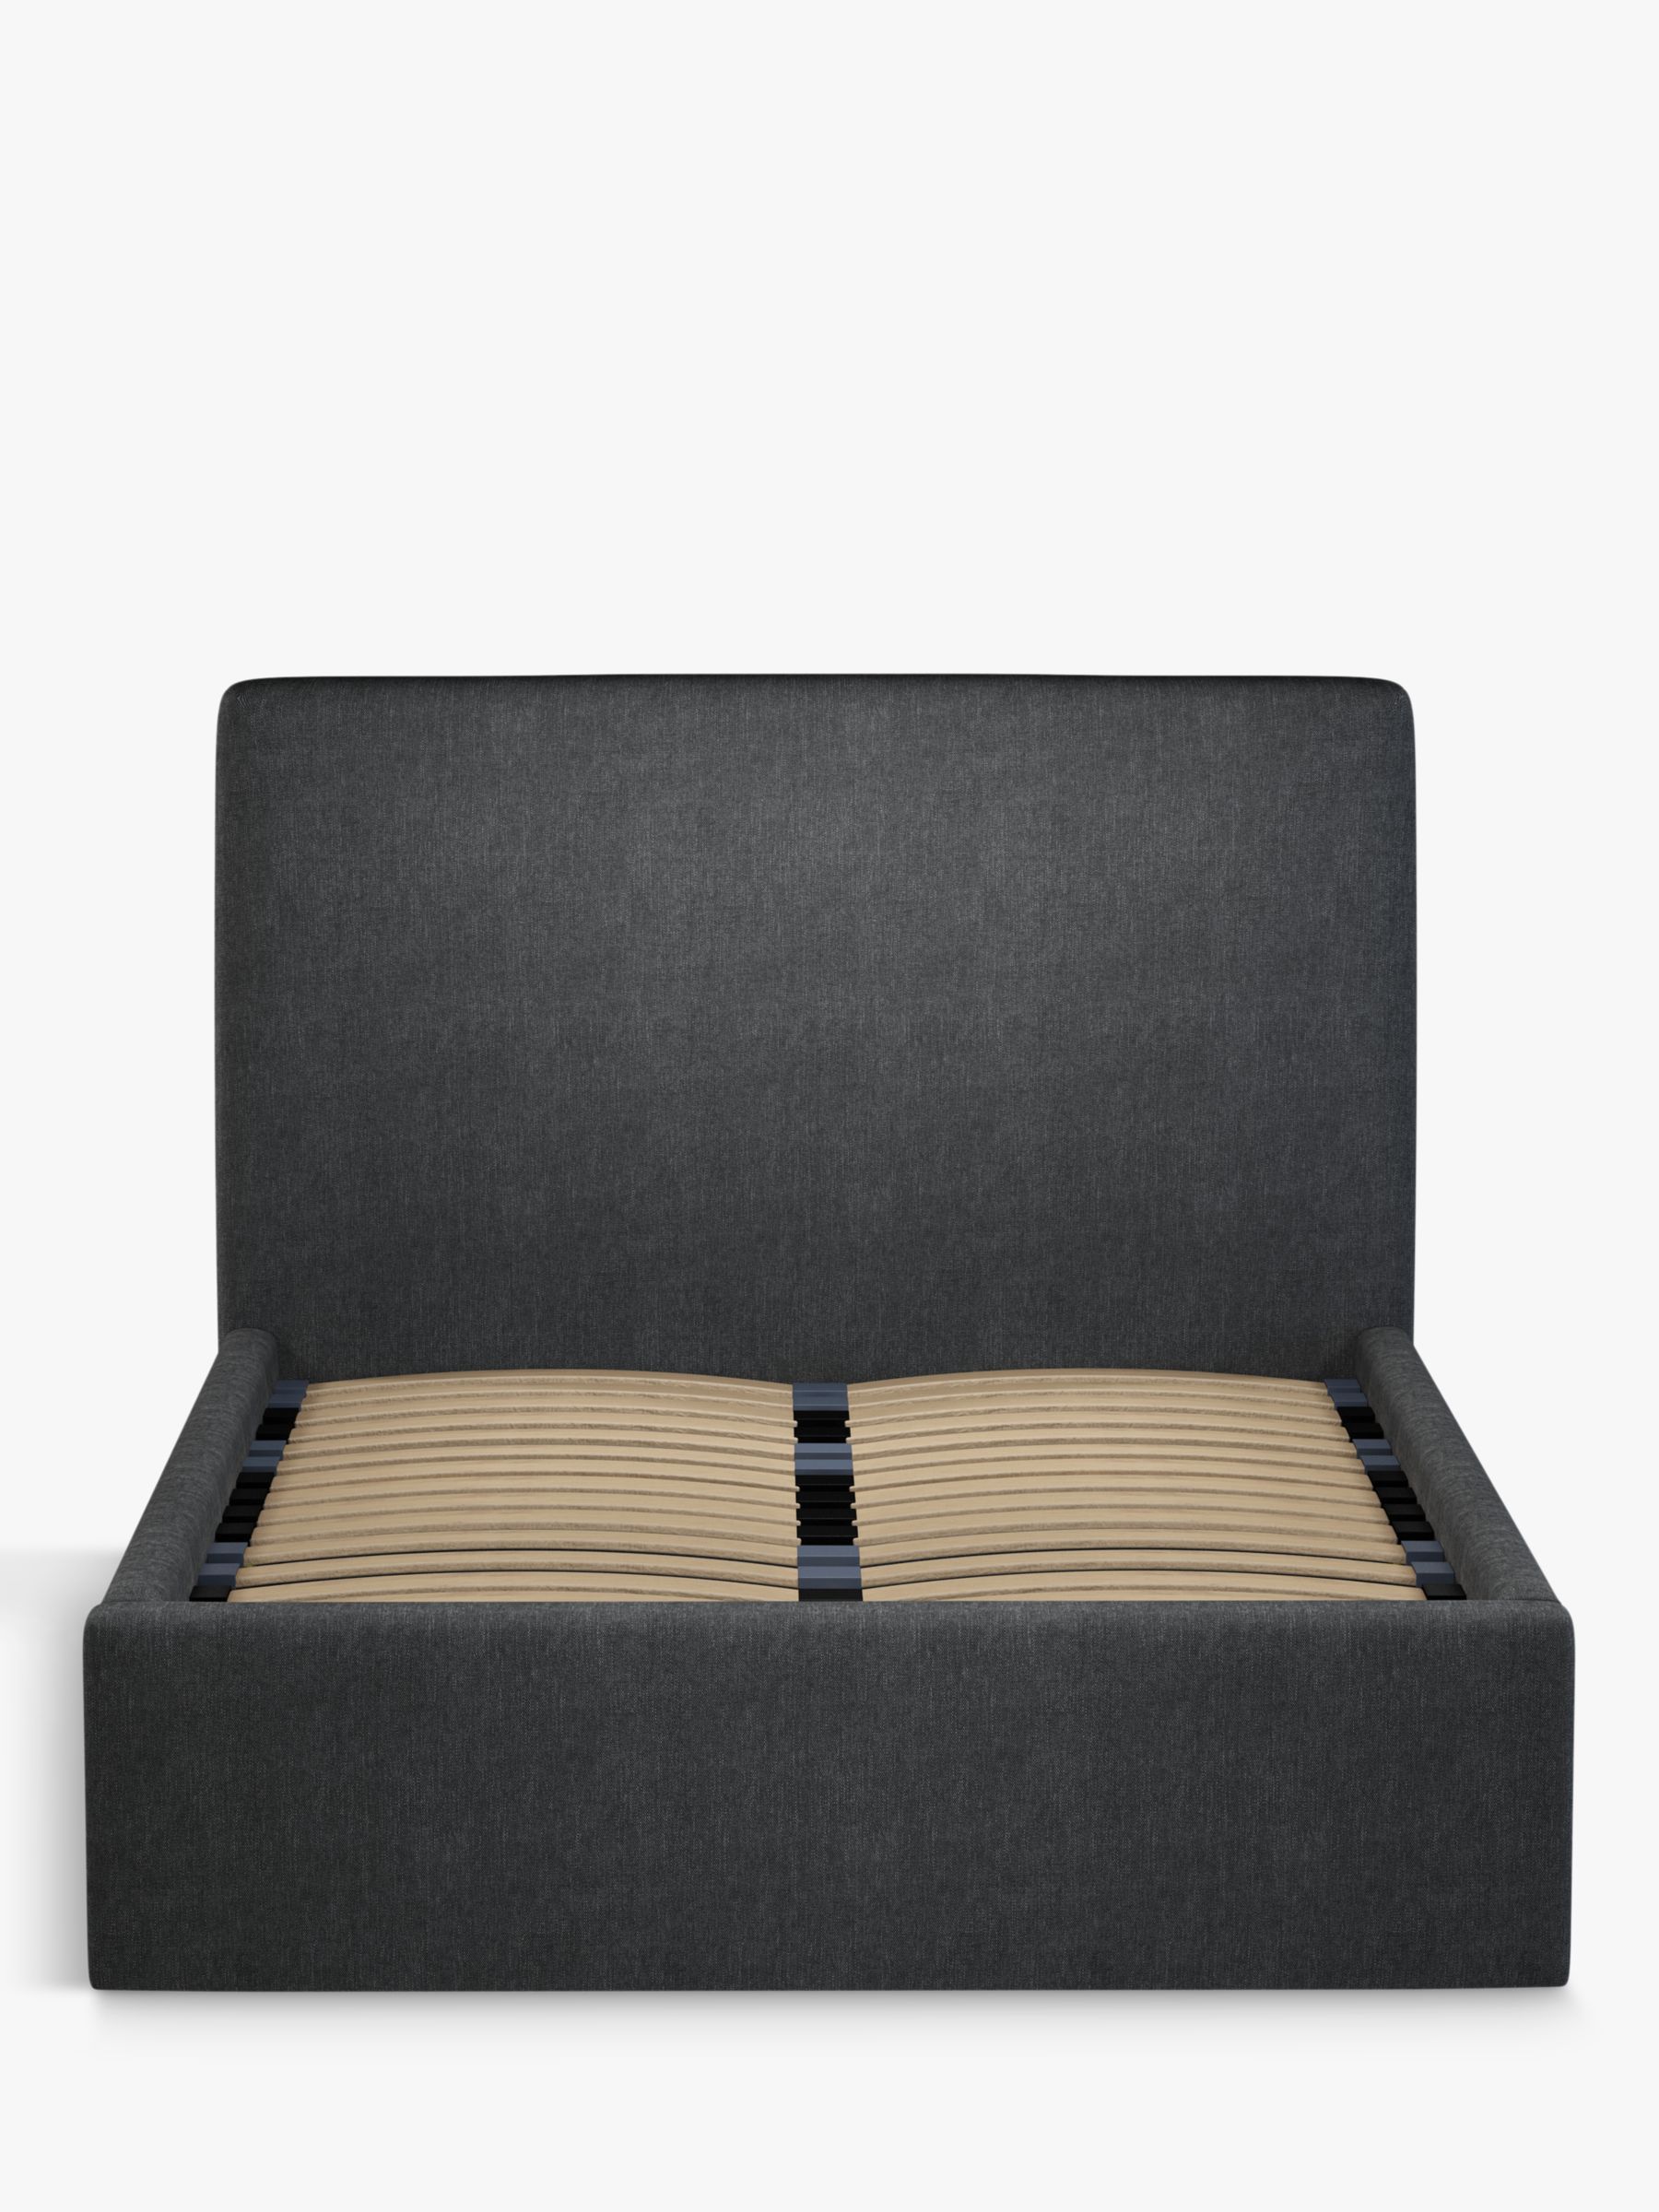 John Lewis Emily Ottoman Storage Upholstered Bed Frame, Double, Soft ...